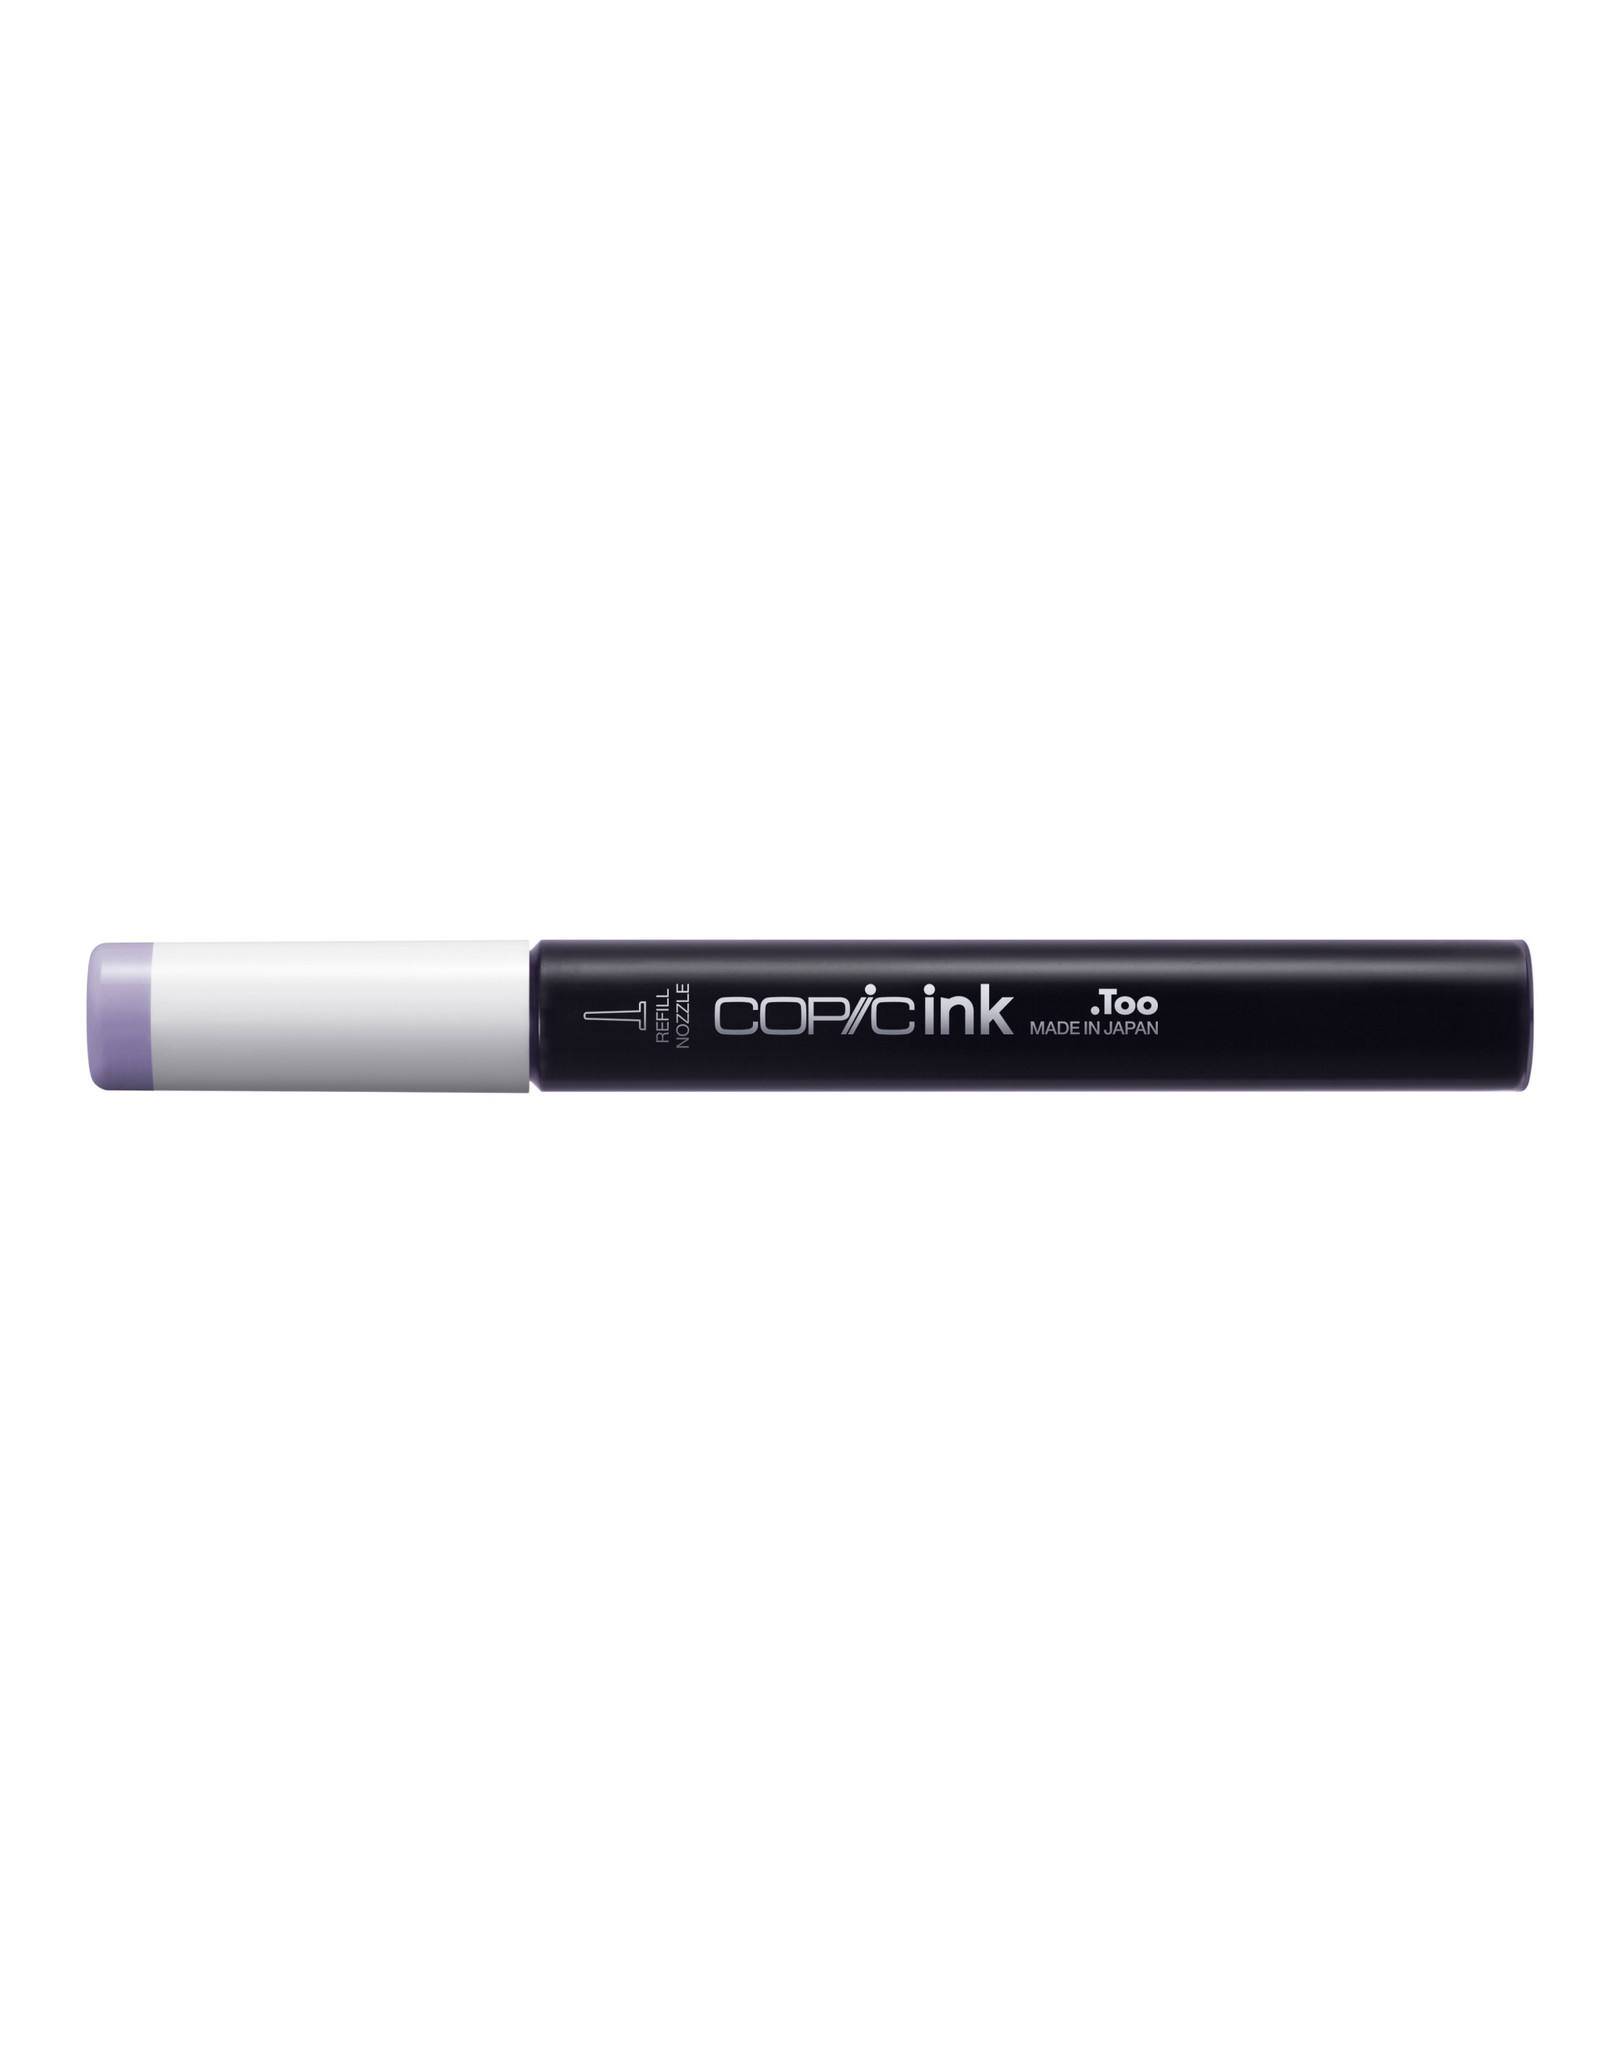 COPIC COPIC Ink 12ml BV11 Soft Violet